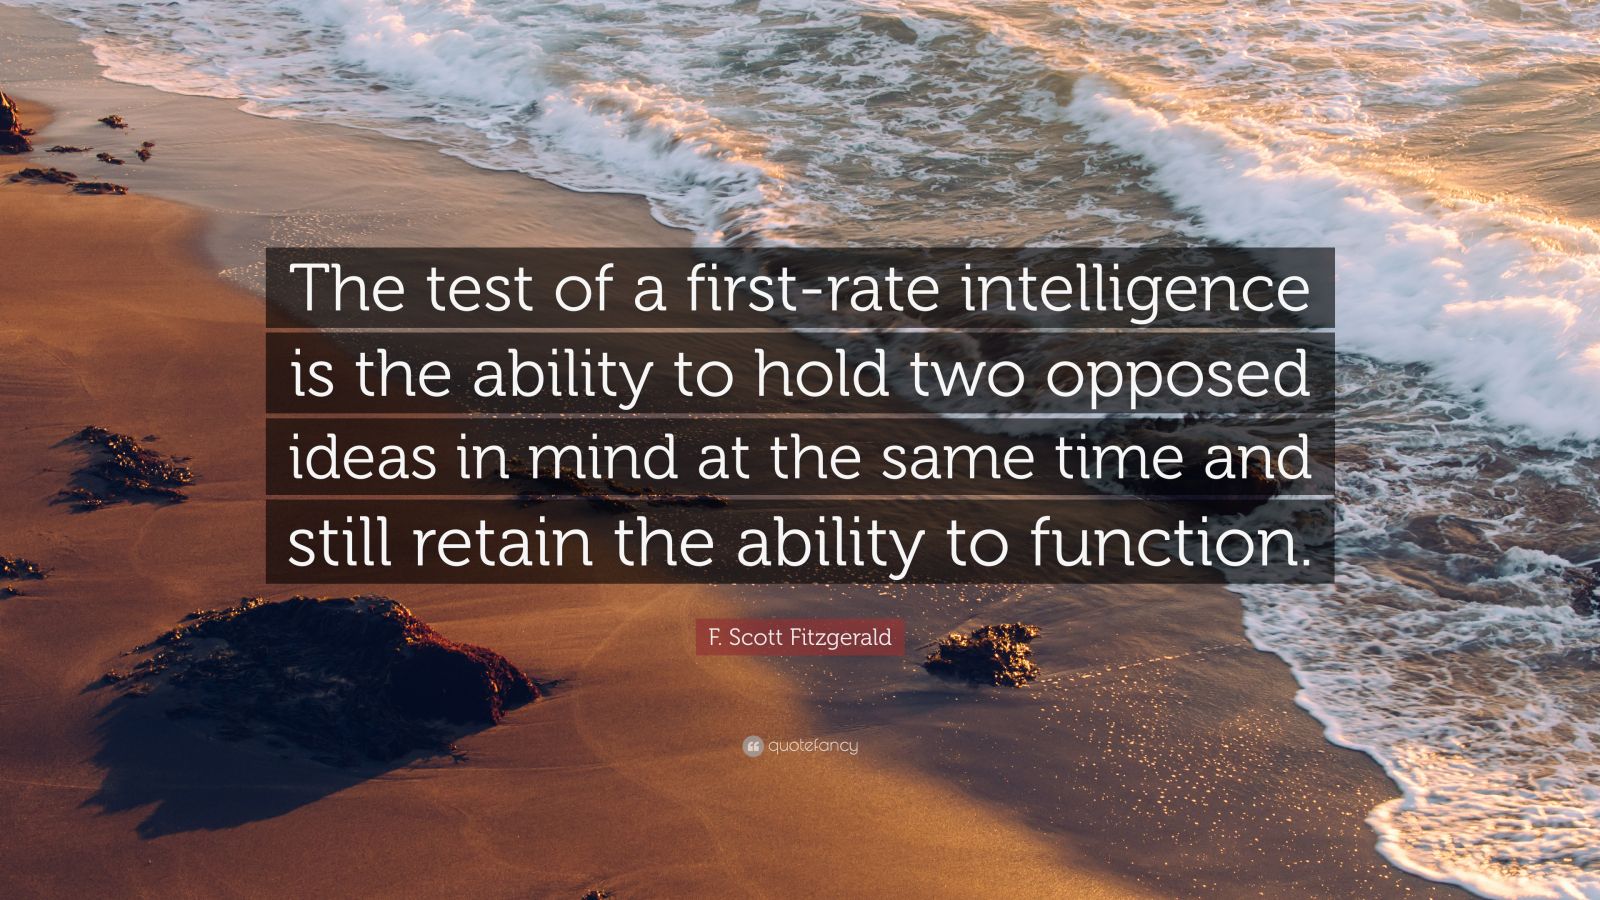 F. Scott Fitzgerald Quote: “The test of a first-rate intelligence is ...